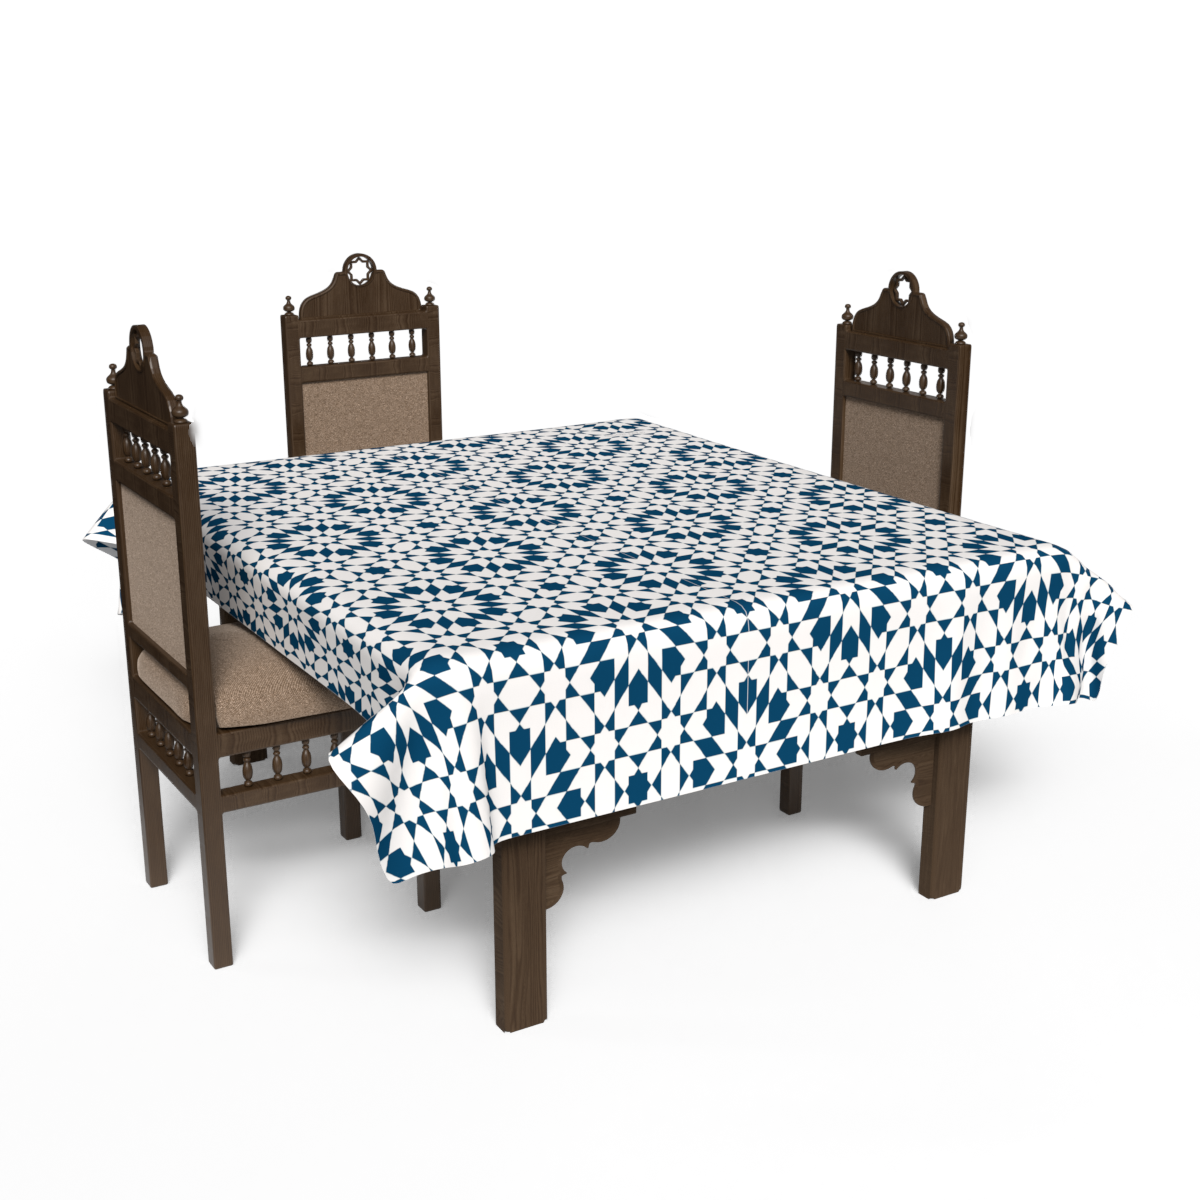 Table cloth - multiple sizes - ROM563